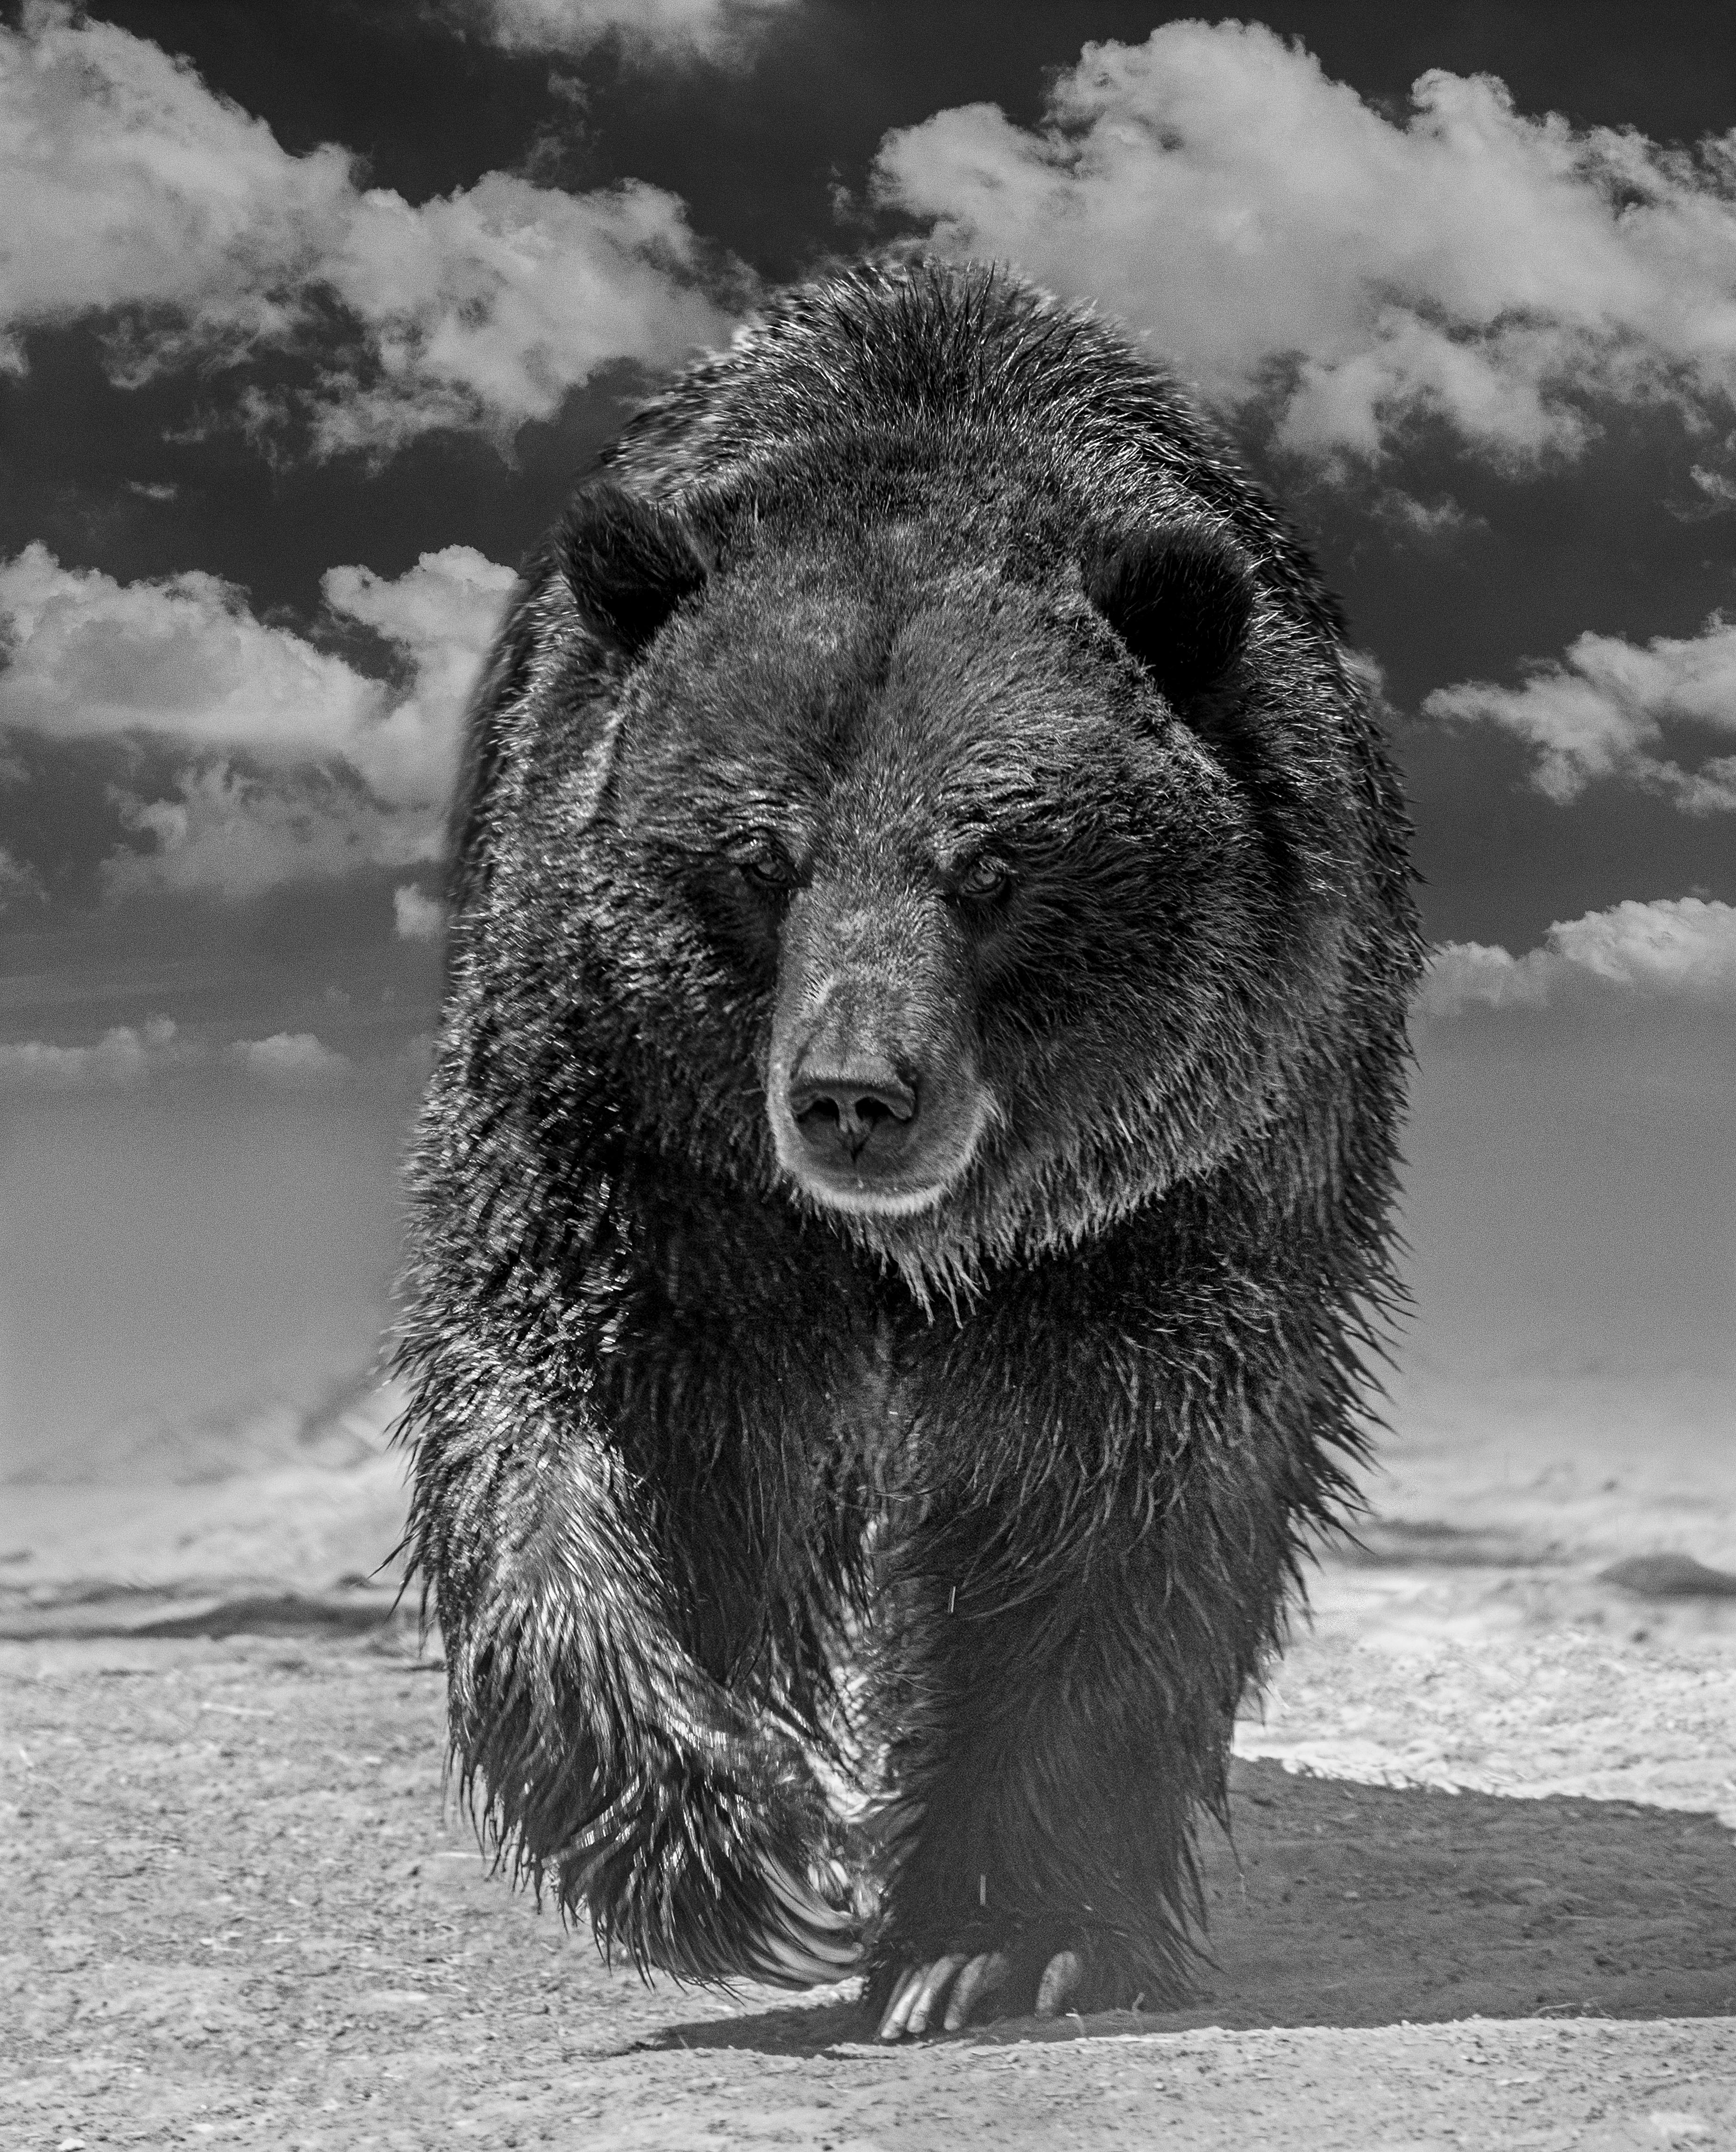 Shane Russeck Animal Print - "Grizzly Shores" 40x60 - Black and White Photography  Grizzly Bear, Unsigned Art